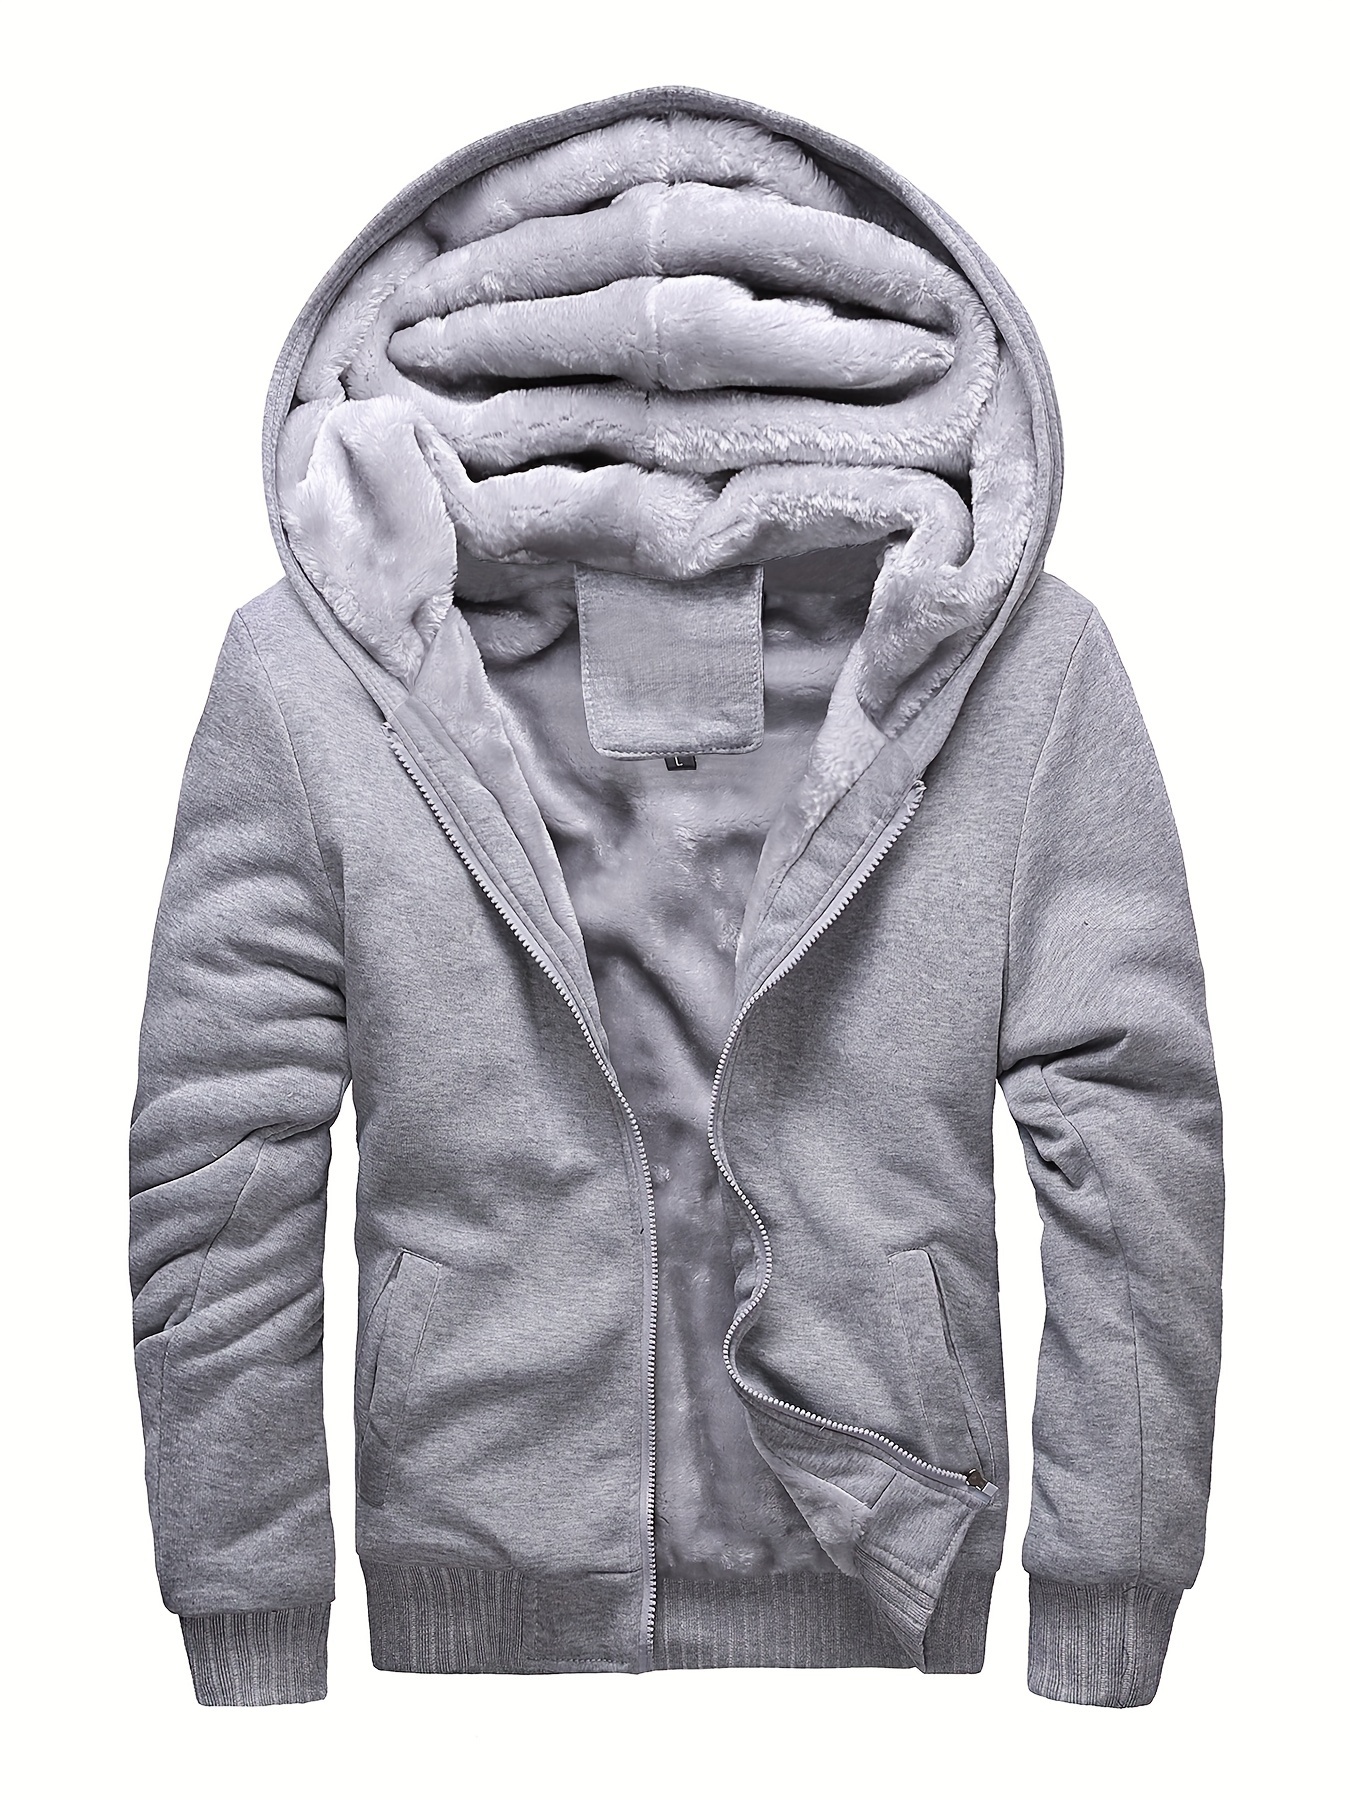 BOONEE Zipped Fishing V.e.s.p.a Hoodie, Breathable Men Jacket with Hood,  Comfort Midweight Hoody for Adult Running-Grey